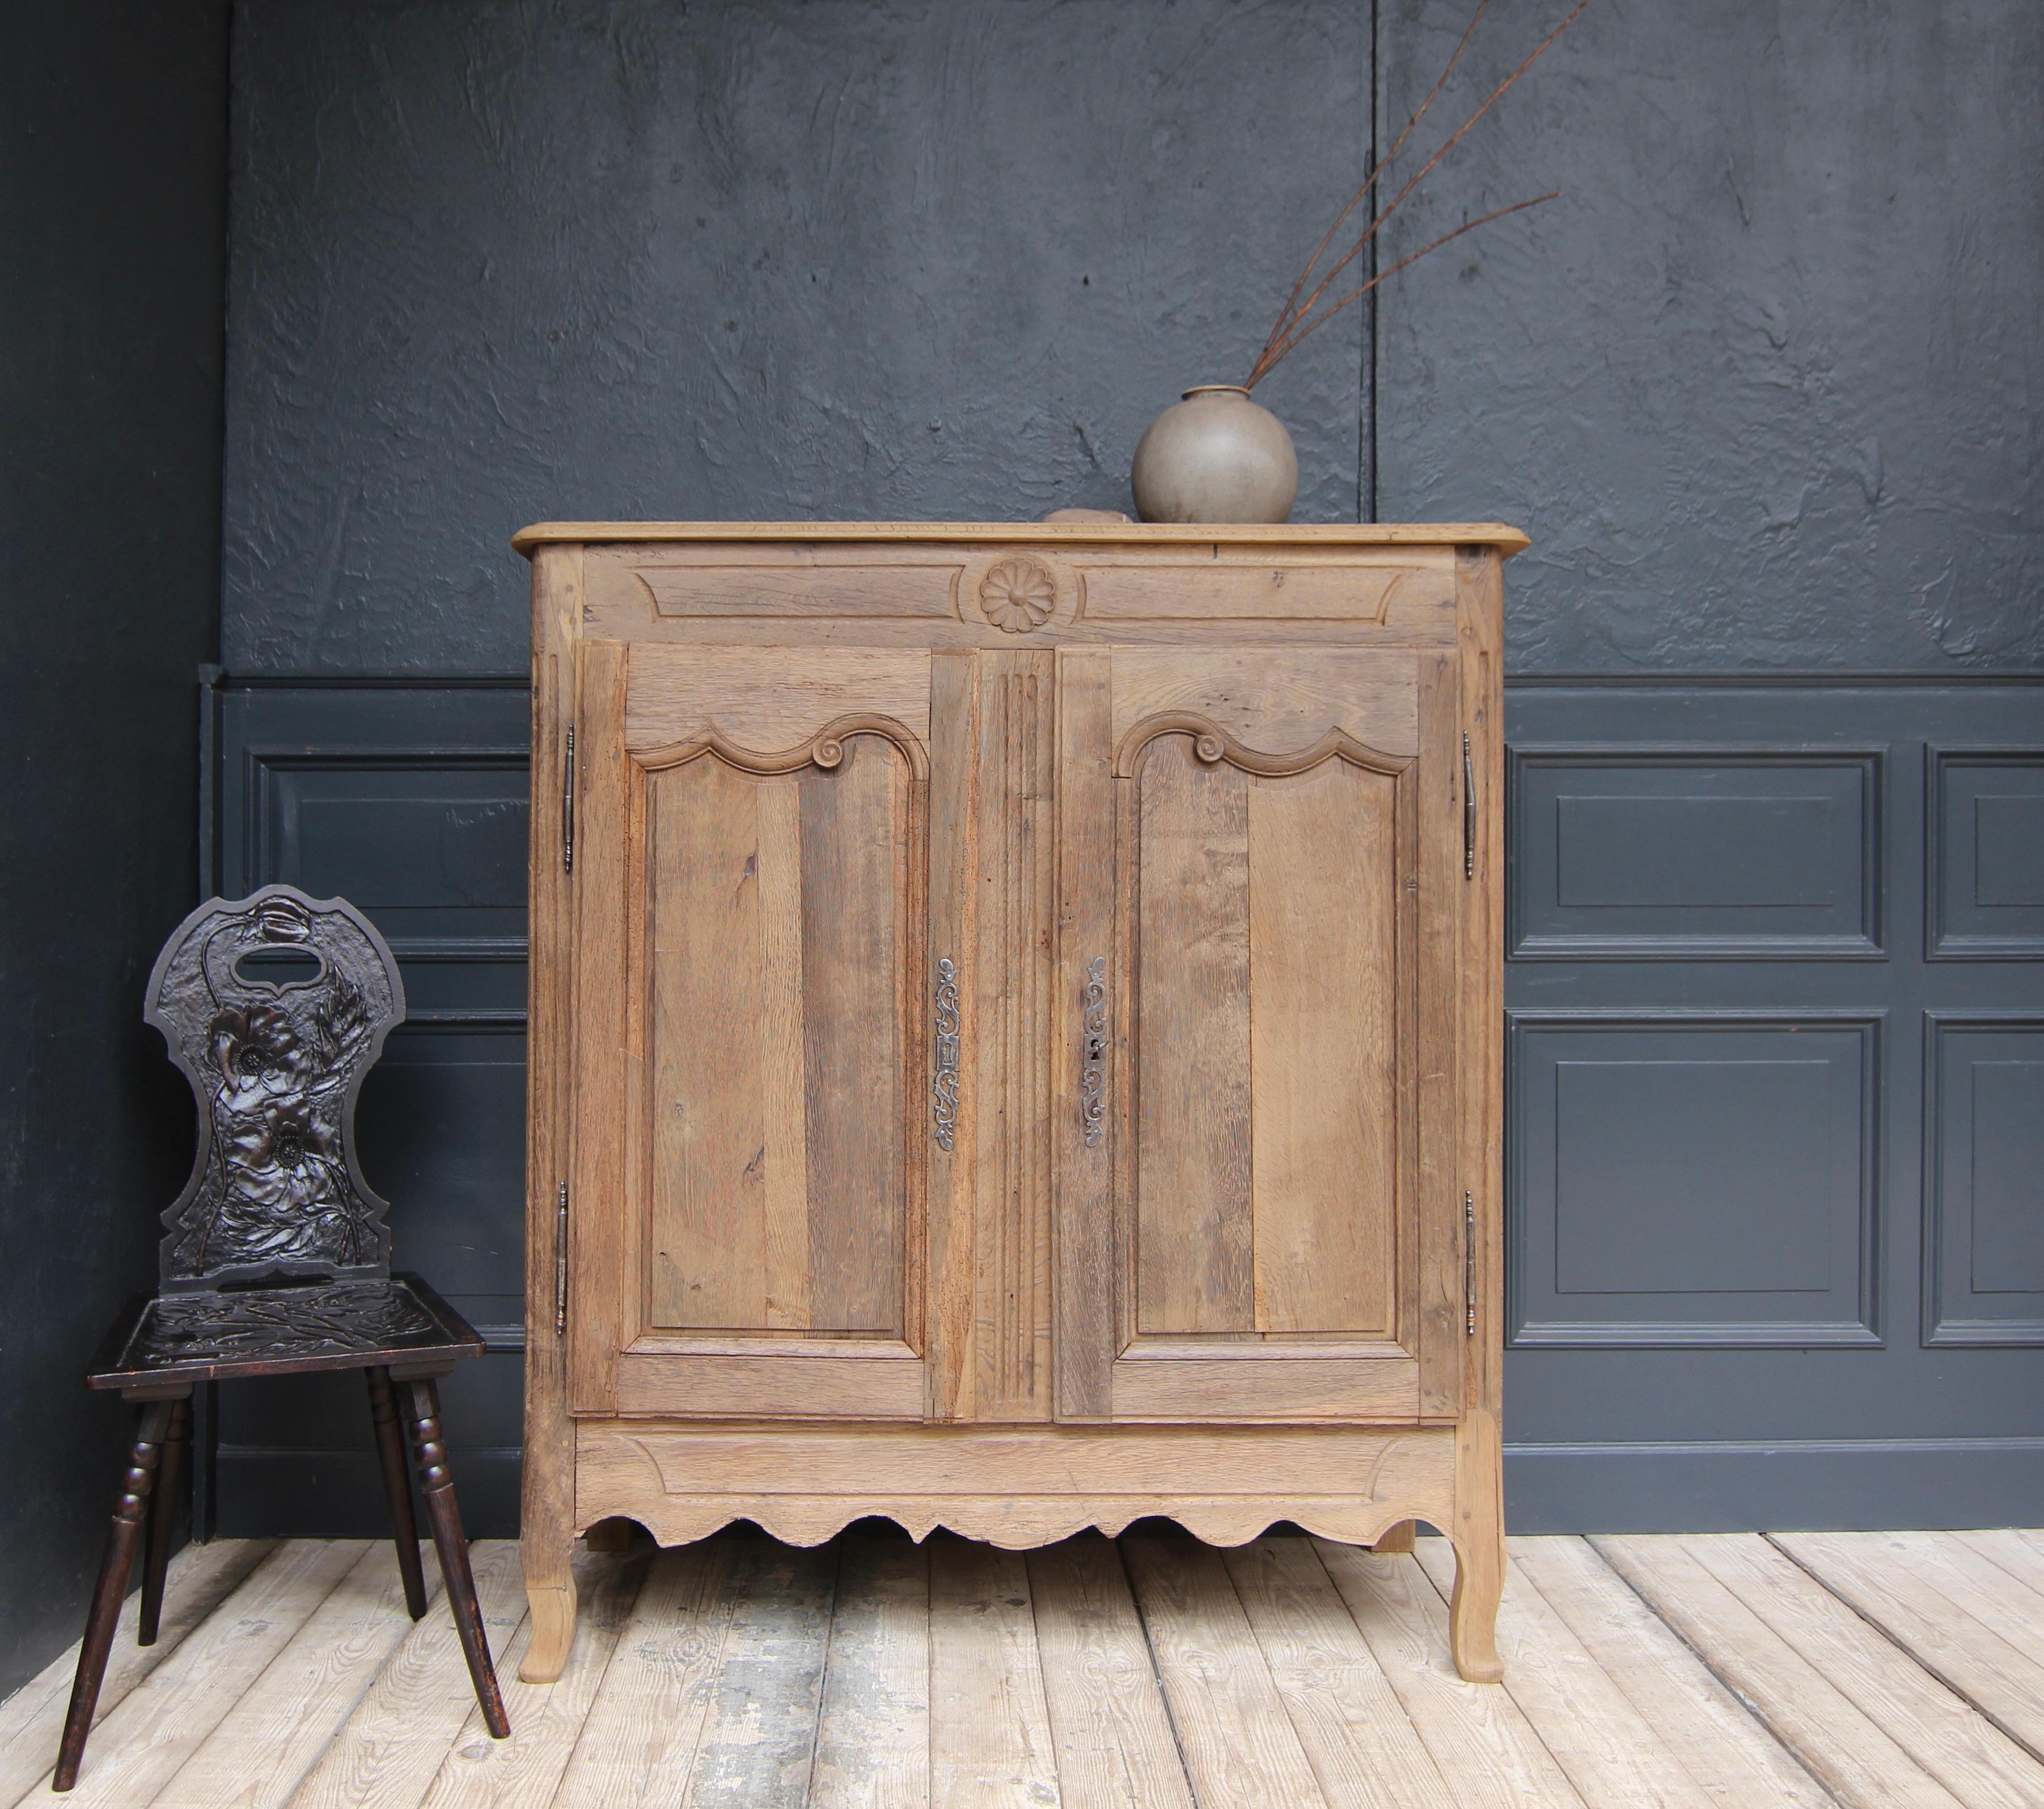 A early 19th century French provincial buffet or cabinet made of oak.

Traditionally crafted construction, the oak body moulded on the sides with a slightly protruding profiled top panel. Rounded fluted pilaster strips and the multiple curved plinth